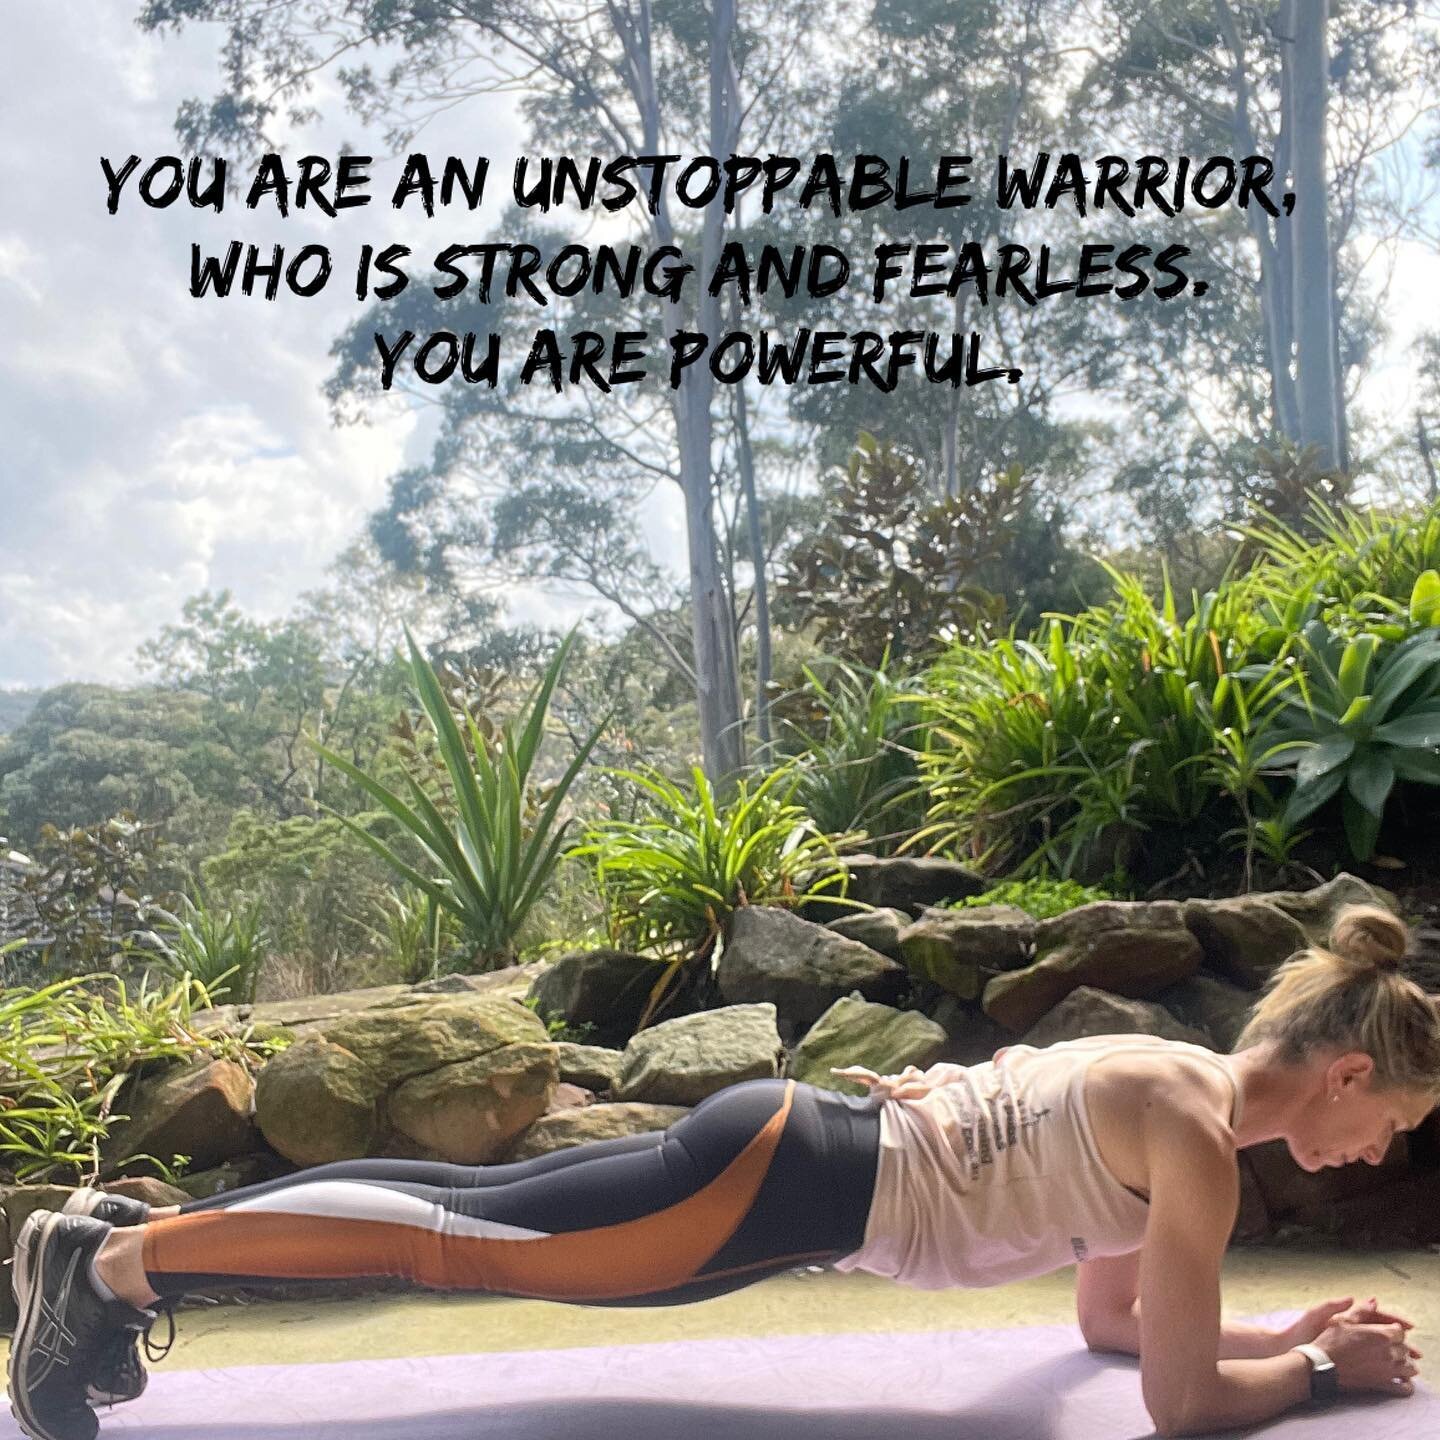 First day of Spring 🌼First Day of the September Team Challenge💪🏻
The ladies are off to a good start 🙌🏻 #TeamUnstoppable#TeamPowerful#TeamFearless
⭐️
You are an UNSTOPPABLE warrior,
who is strong 
and FEARLESS
⭐️
You are POWERFUL and 
proud of wh